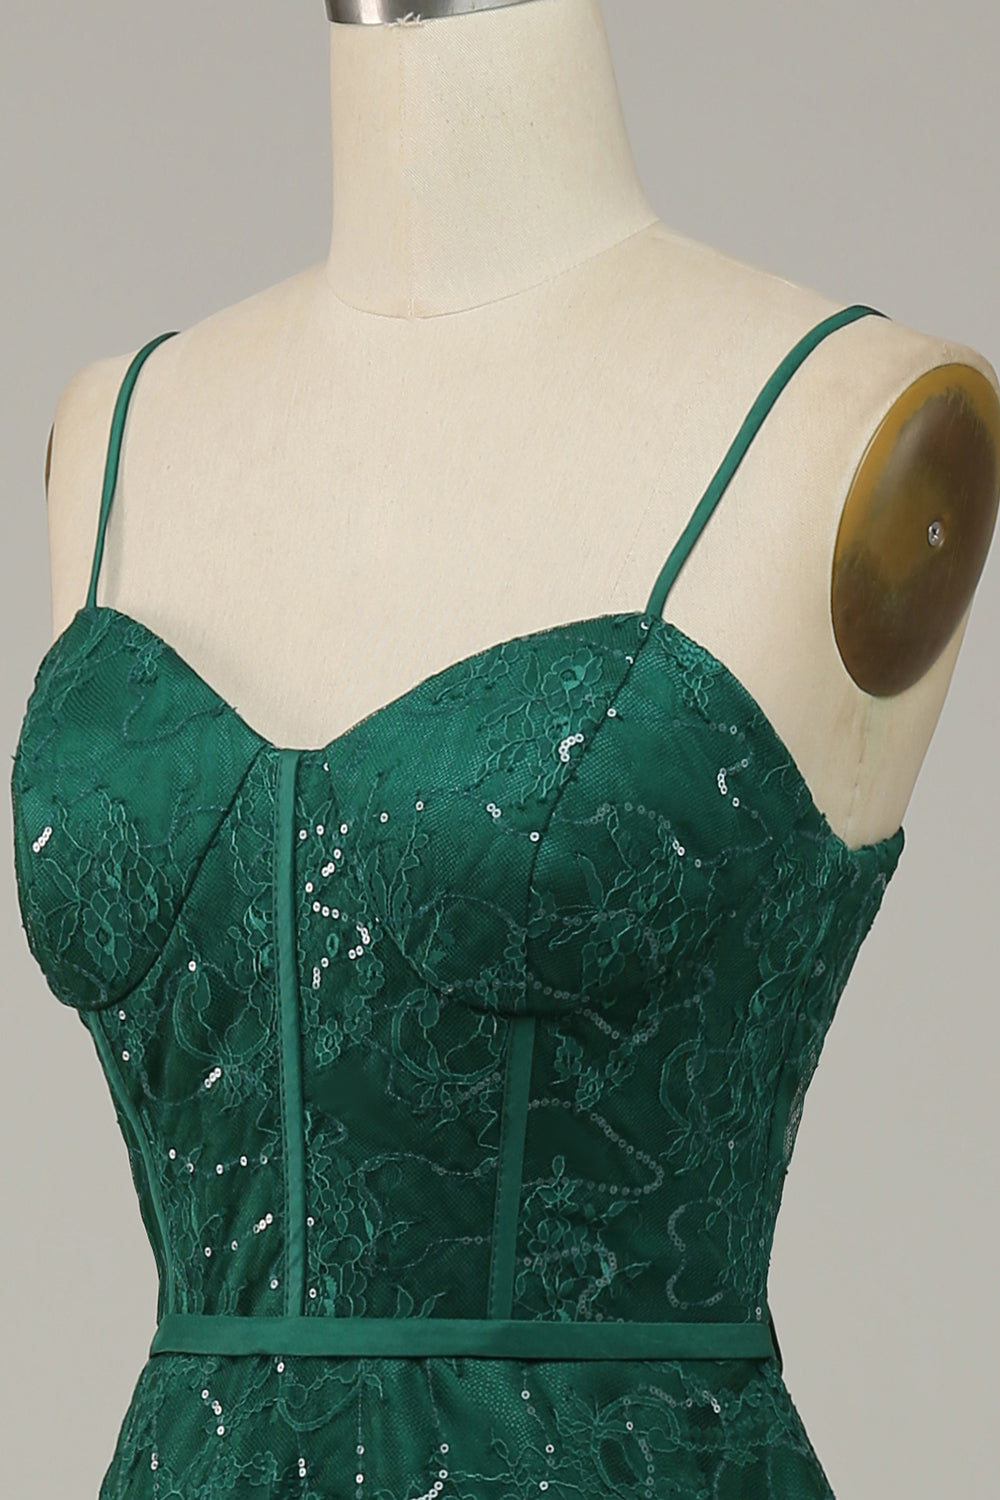 Dark Green A Line Spaghetti Straps Lace Corset Prom Dress with Slit